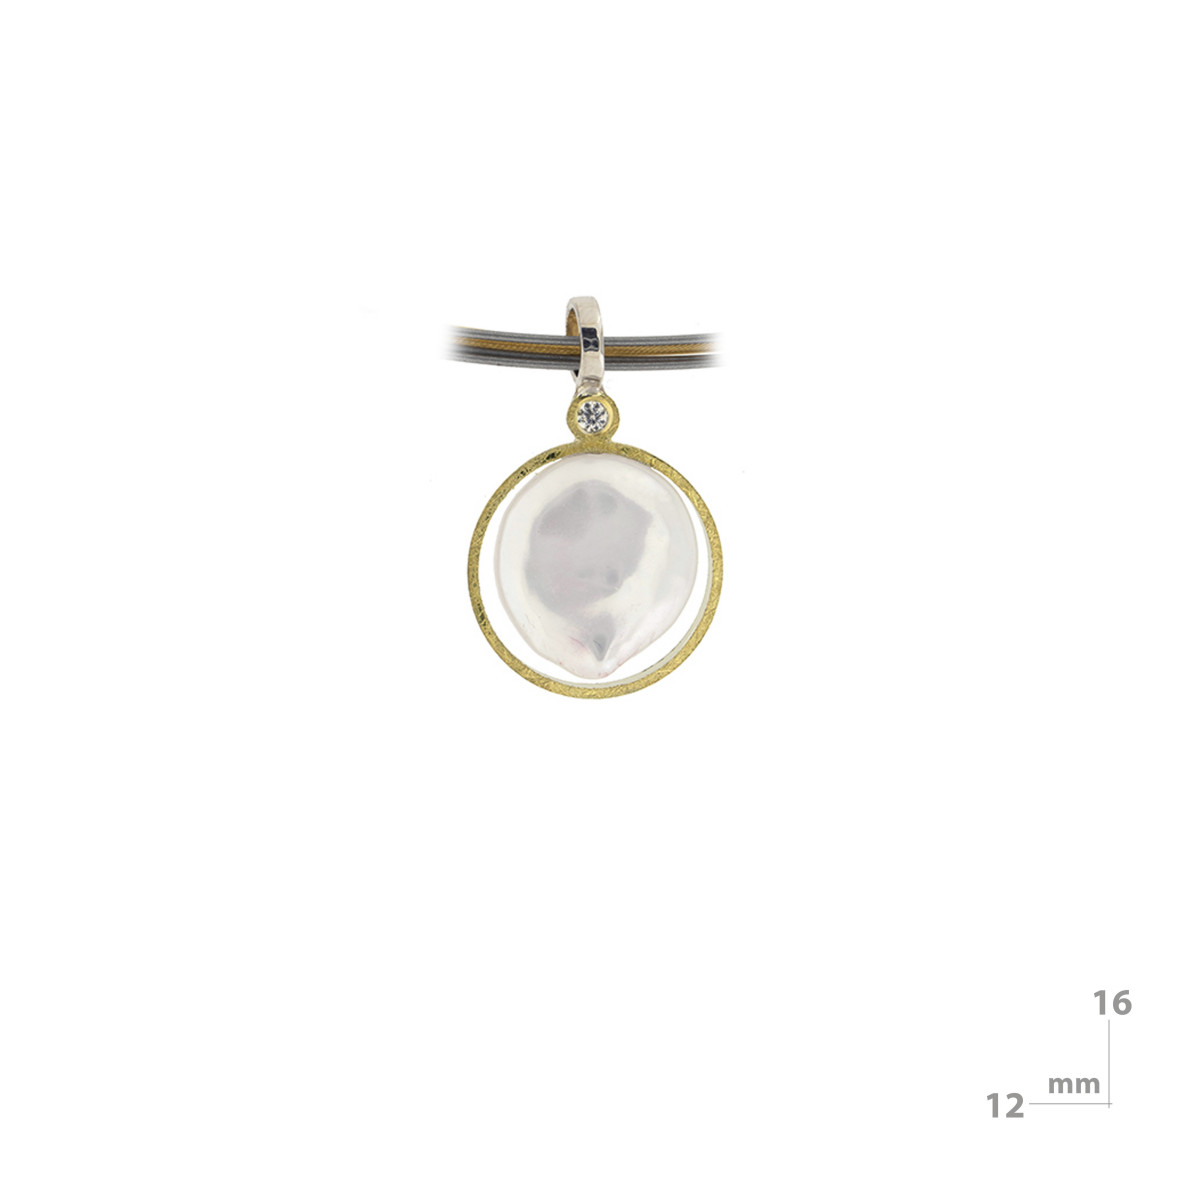 Silver, gold, cultured and shiny pearl pendant